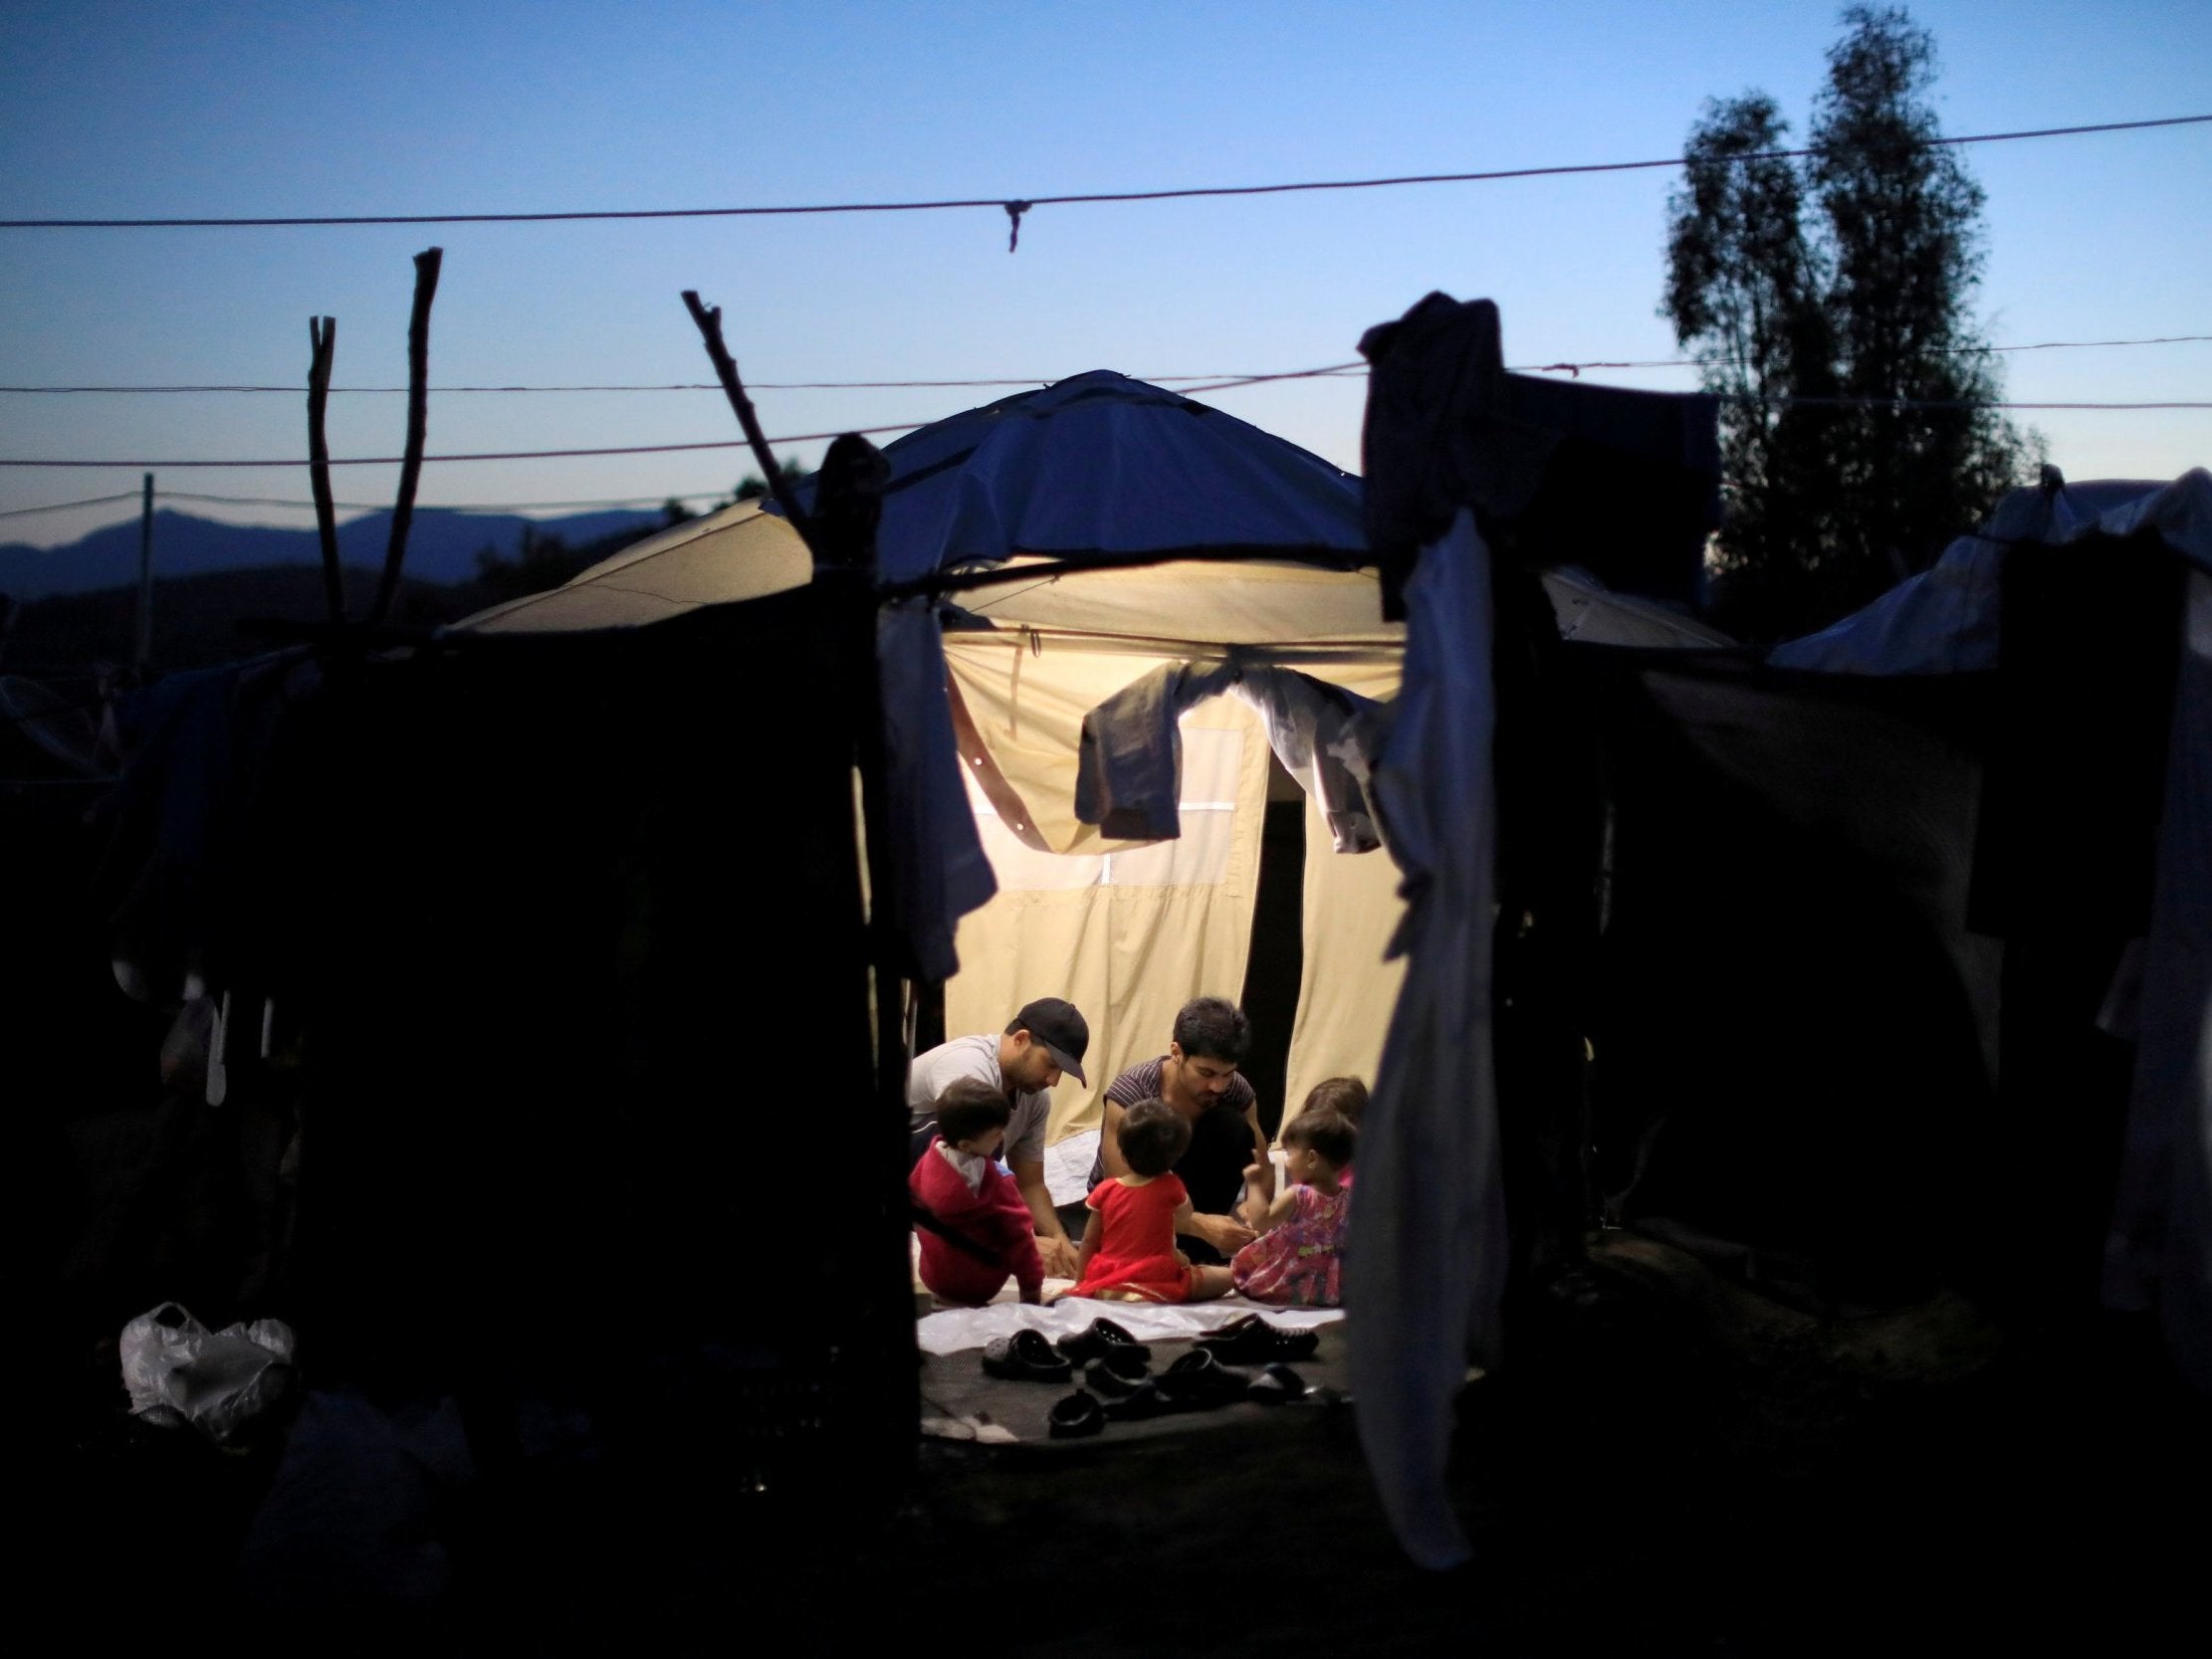 Migrants are pictured in a tent in Greece